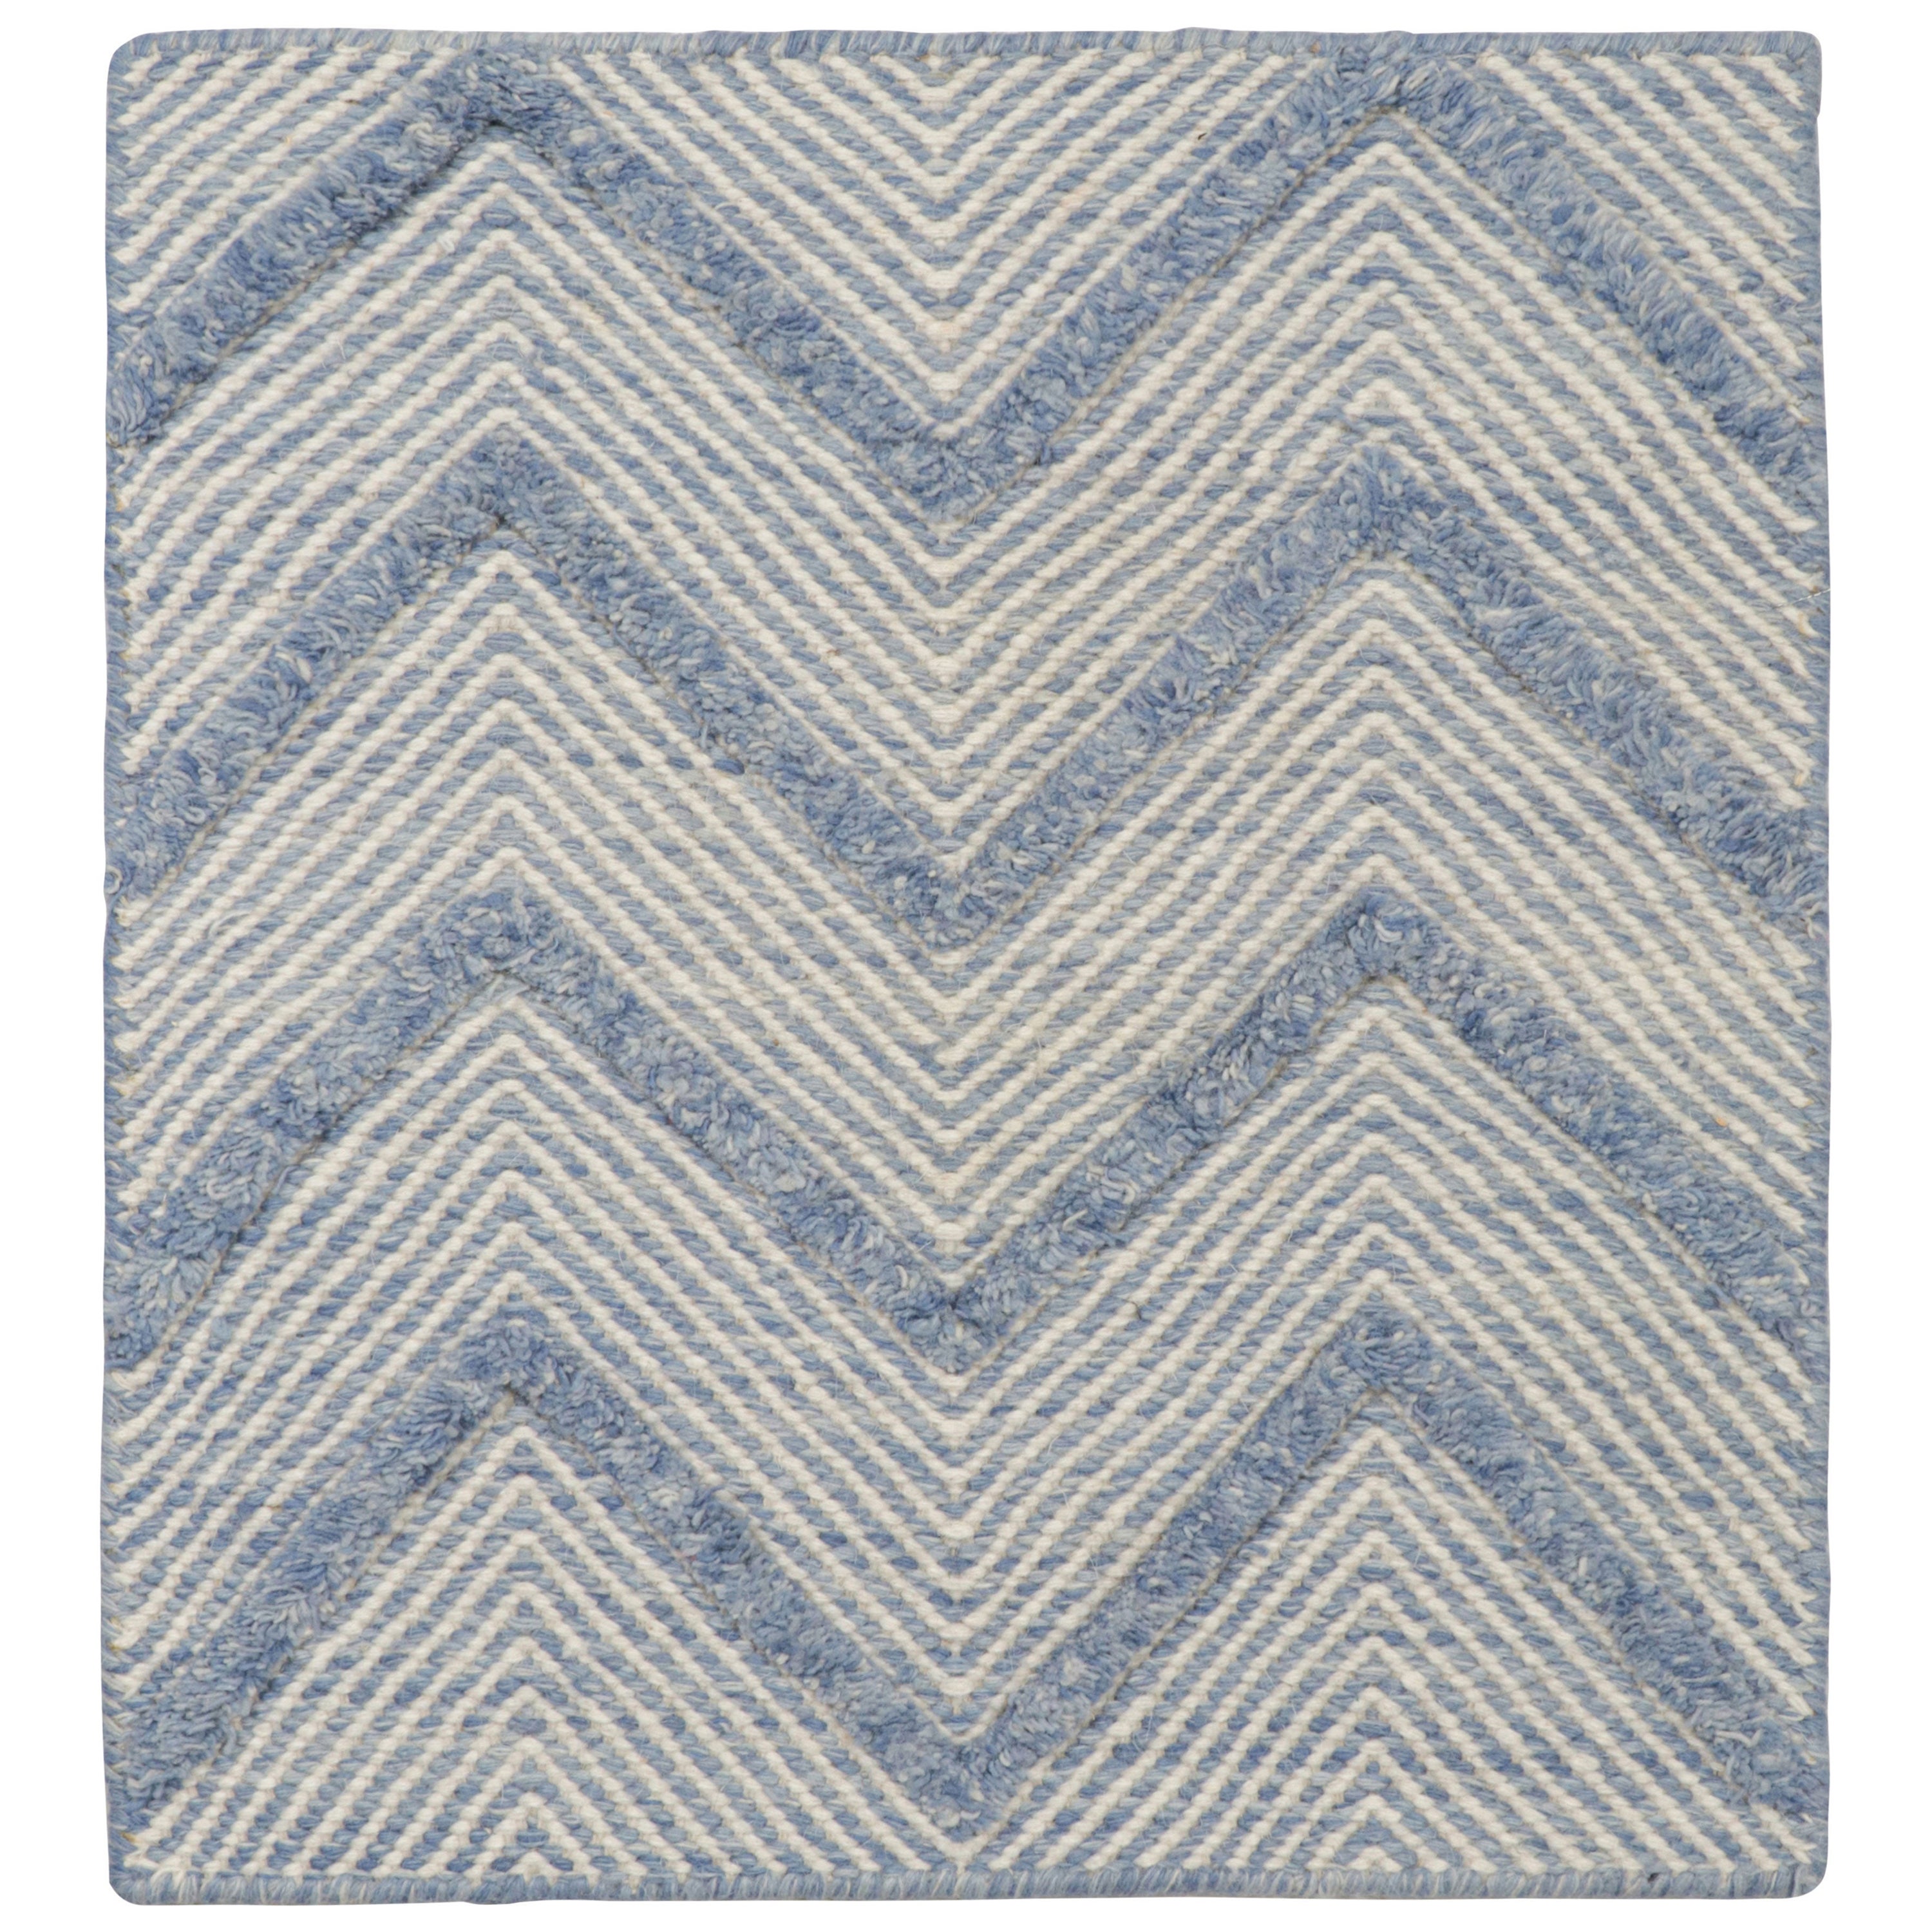 Rug & Kilim’s Contemporary Scatter Rug with White and Blue Chevron Patterns  For Sale